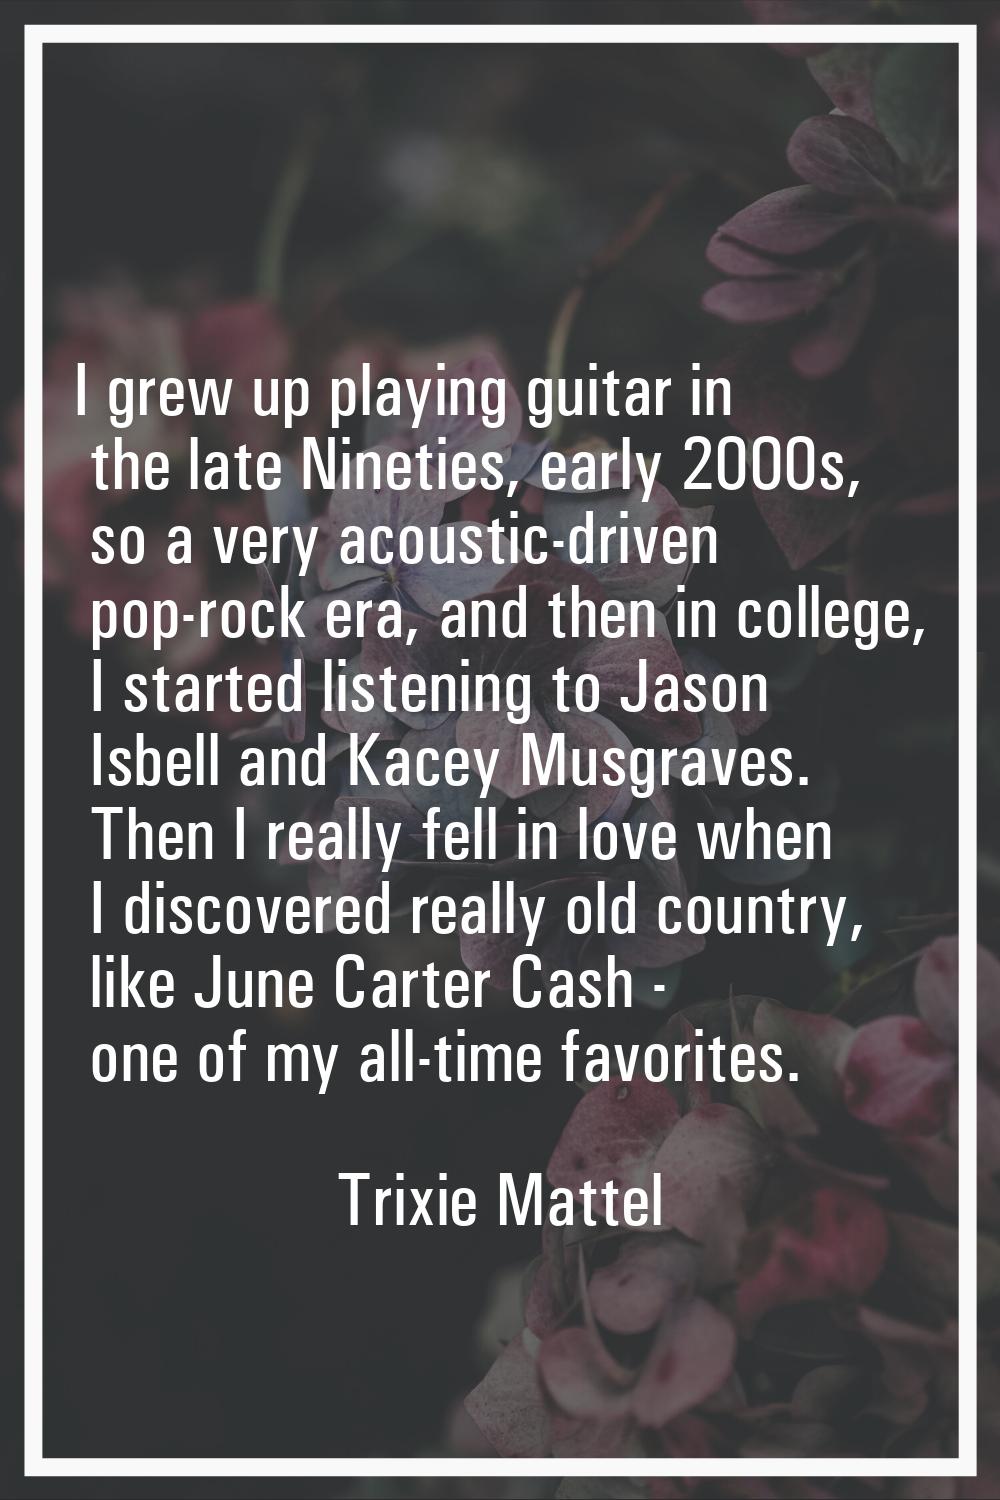 I grew up playing guitar in the late Nineties, early 2000s, so a very acoustic-driven pop-rock era,